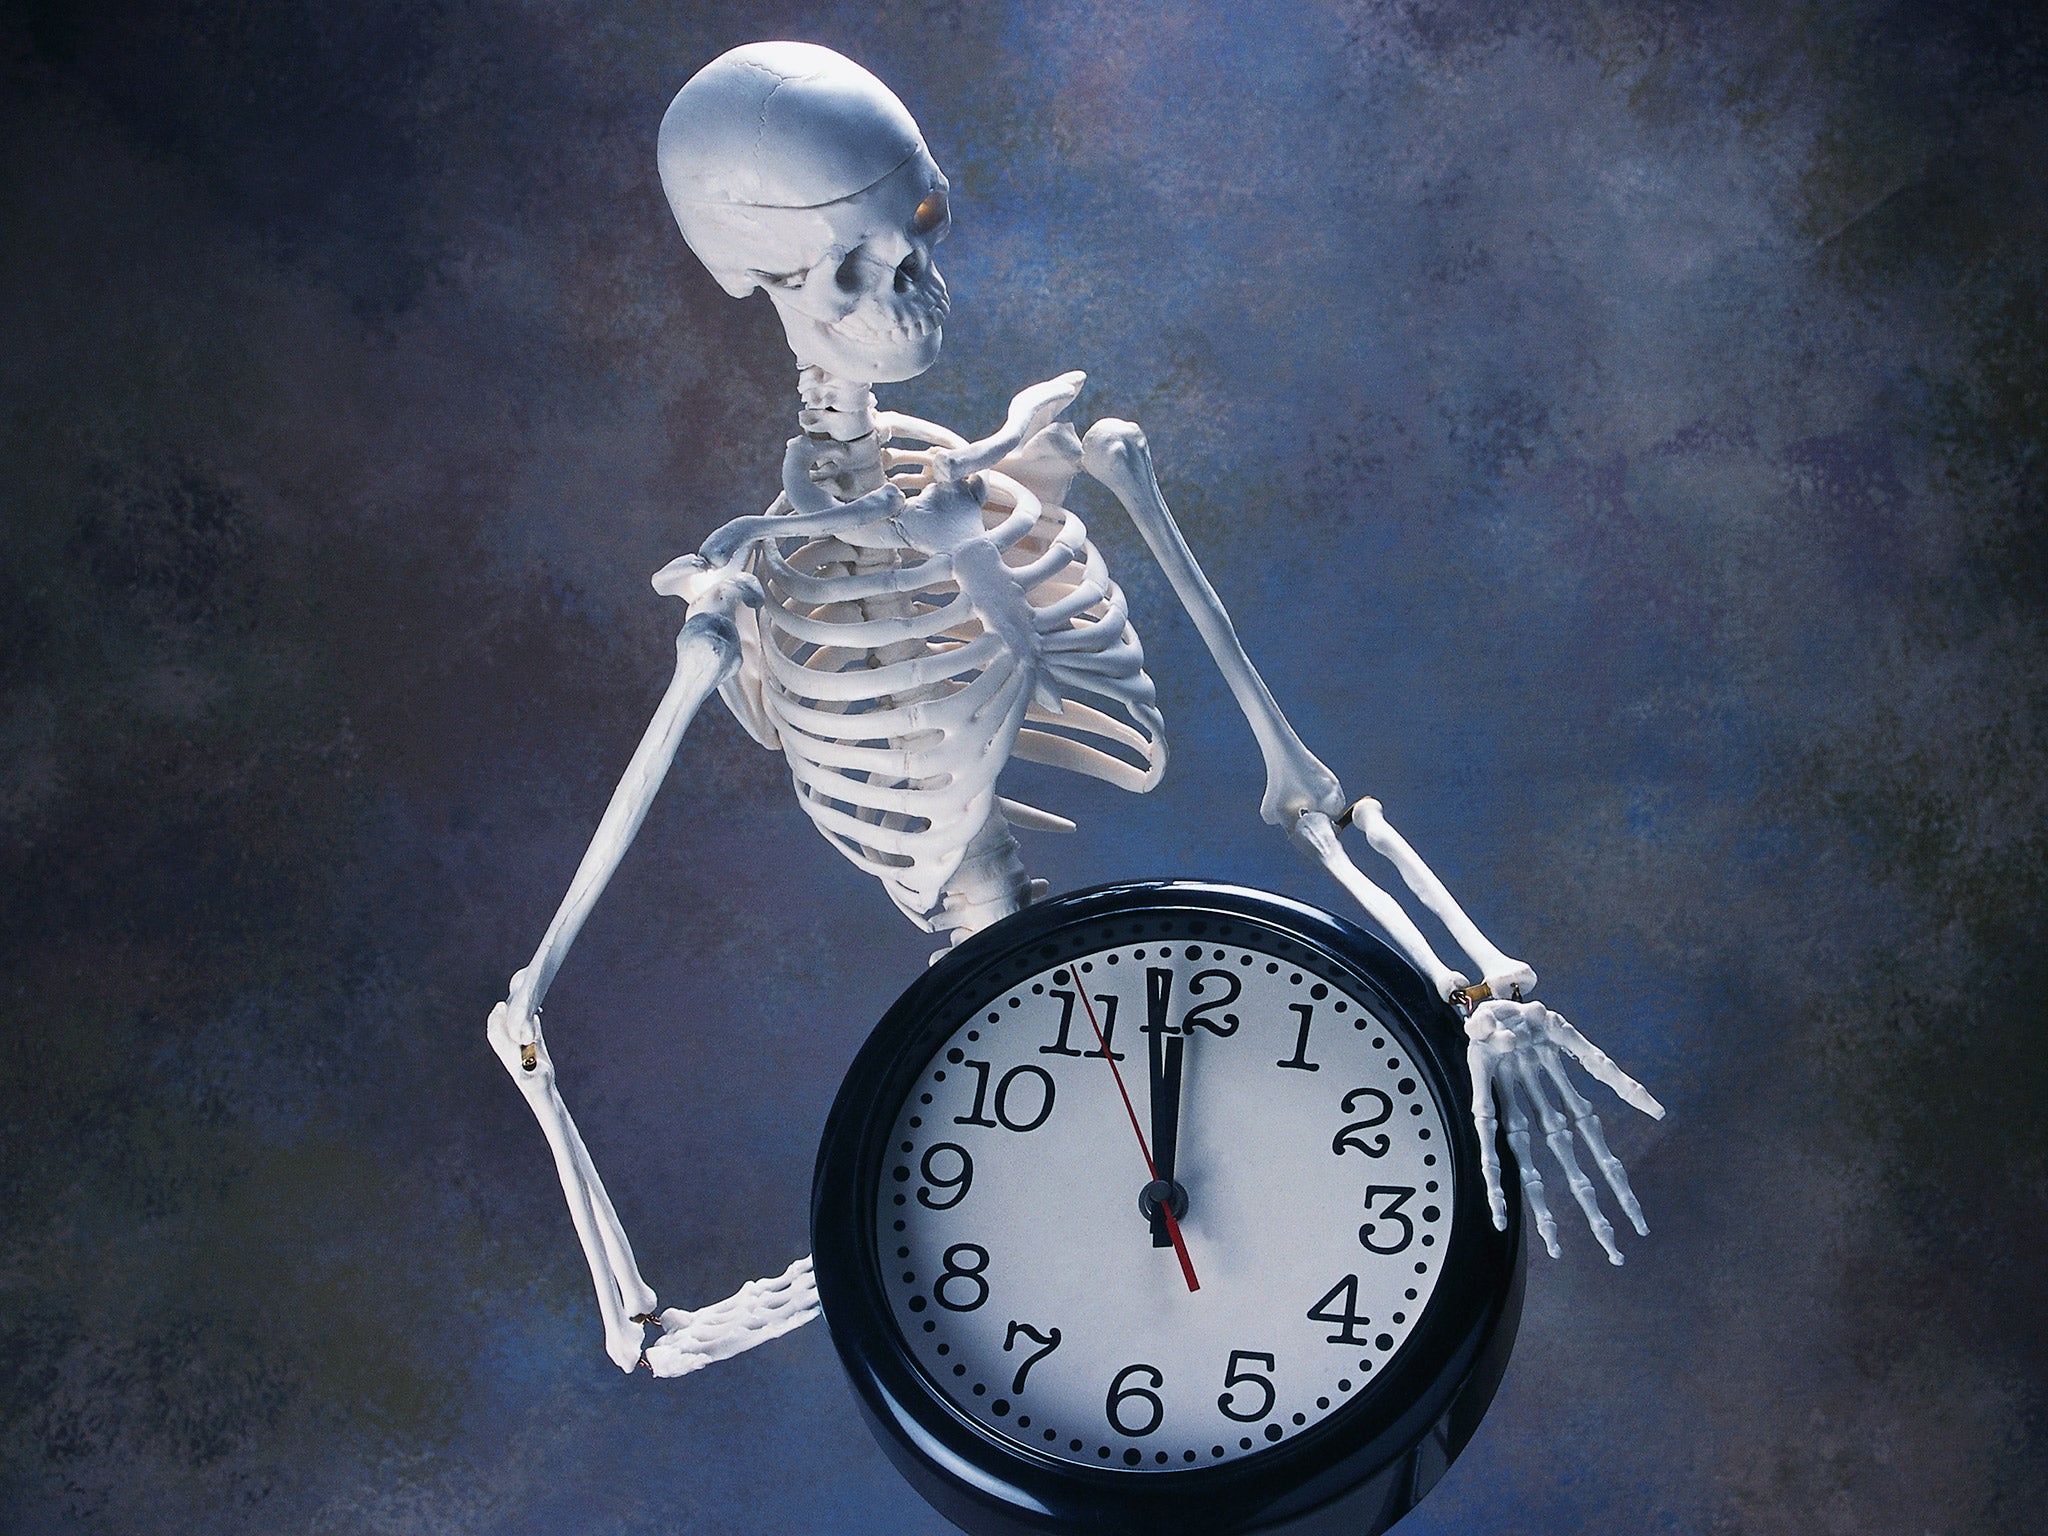 Tick-tock: how long do you have left?